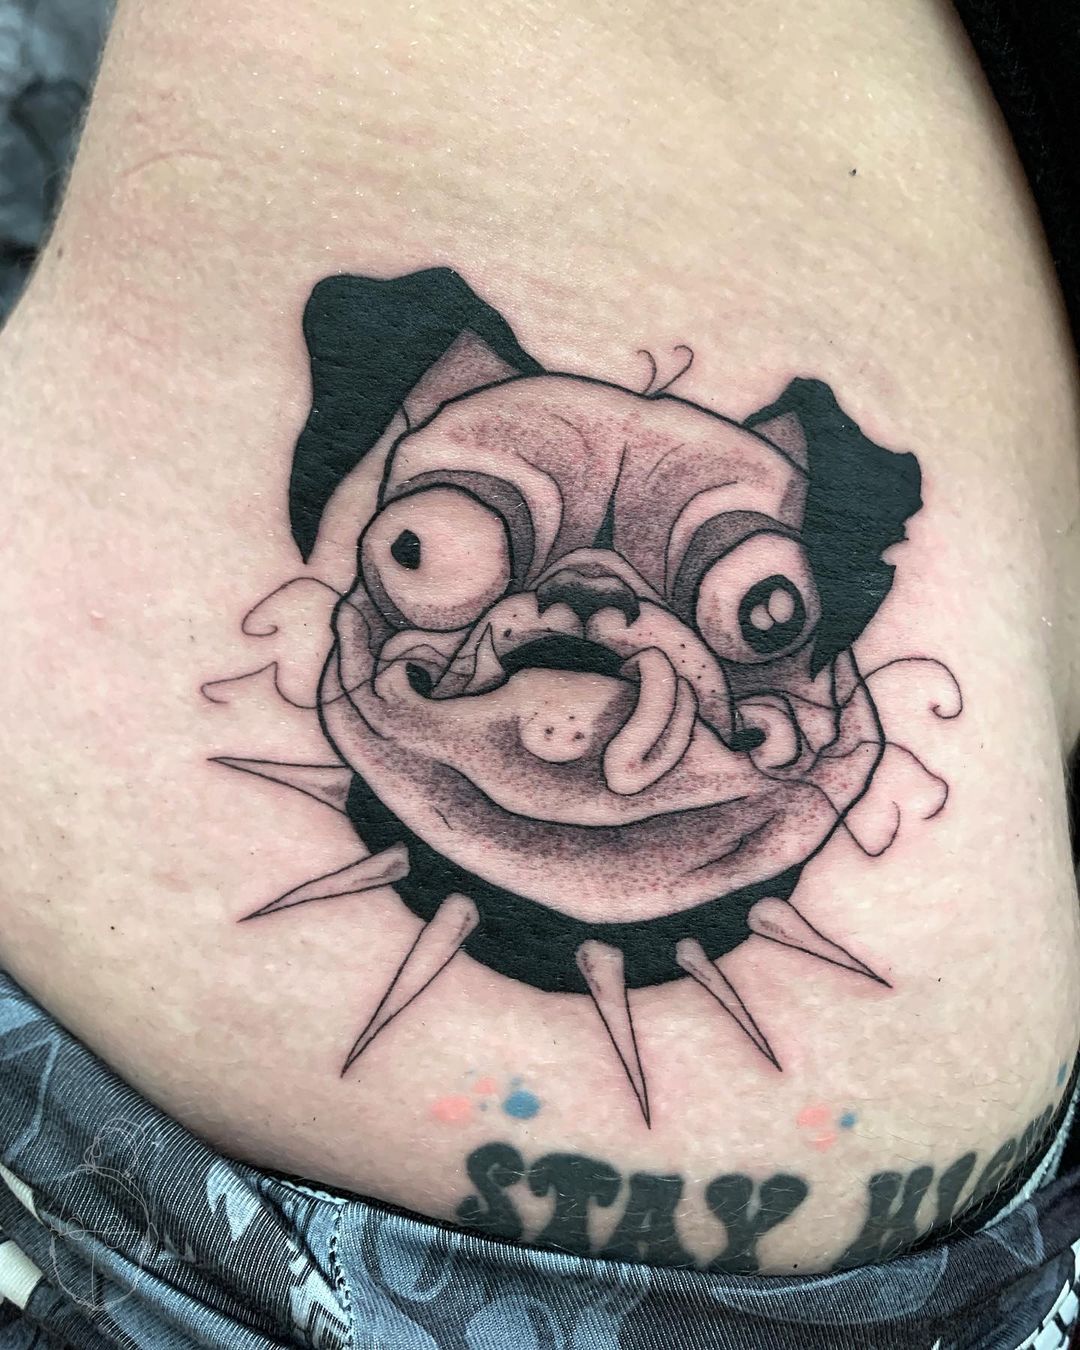 Killer Ink Tattoo on X: "Check out this crazy #Pug from Fiefurie with #killerinktattoo supplies! #killerink #tattoo #tattoos #bodyart #ink #tattooartist #tattooink #tattooart #blackworktattoo #blackwork #pugtattoo #dogtattoo #animaltattoo https://t.co ...